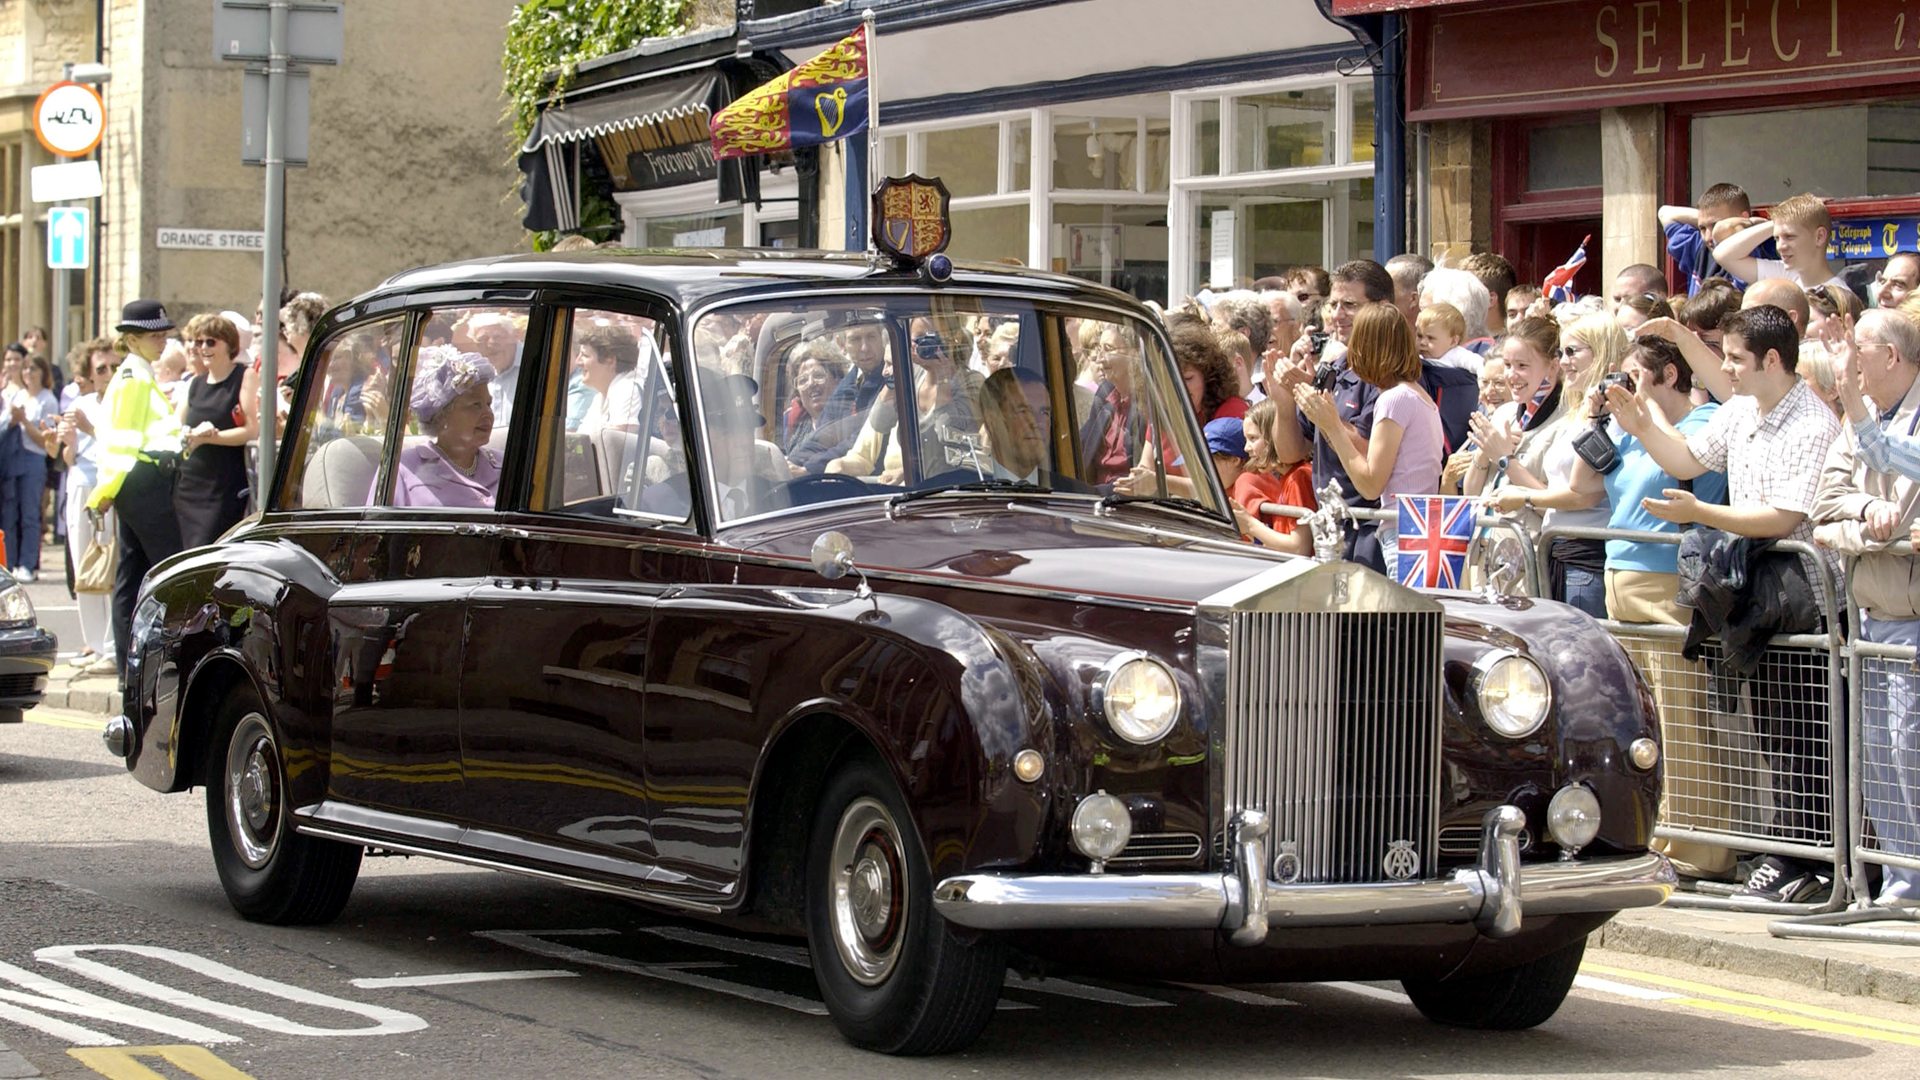 The Rolls-Royce Phantom V, still with a single headlight on each side, would be replaced by a very similar car, the Phantom VI, still used by royalty. 